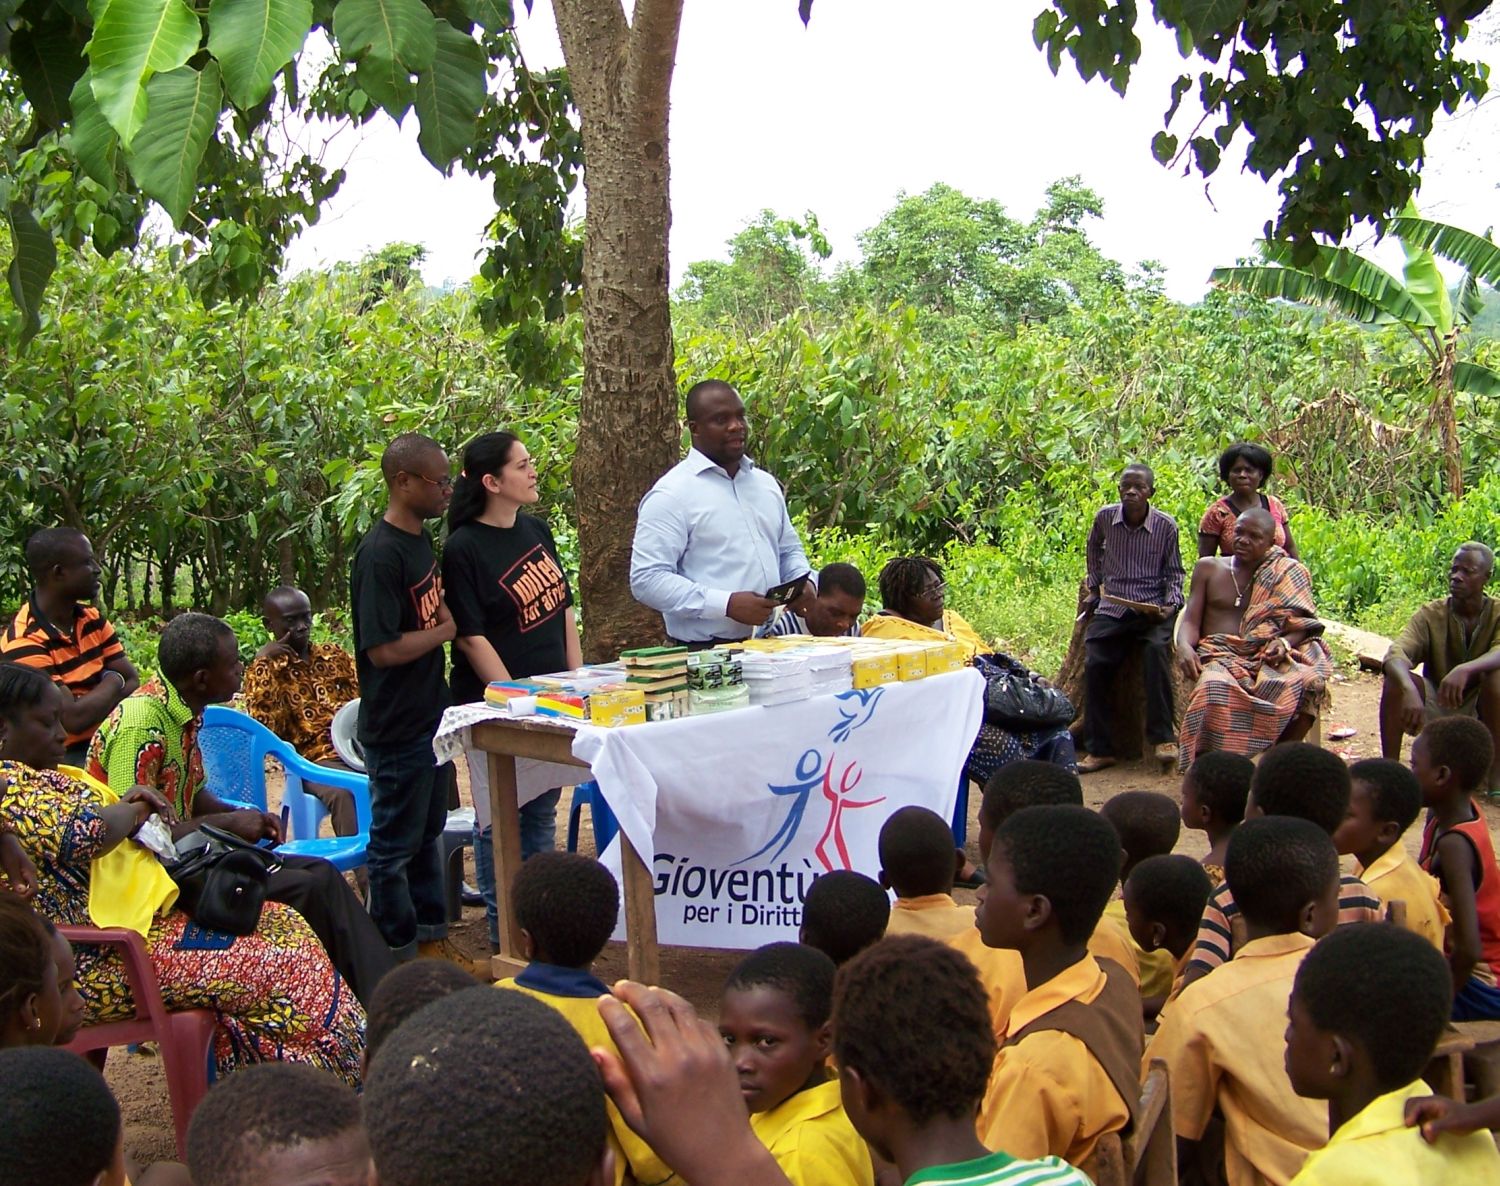 A West African village, where Italian Scientologists are providing human school supplies and education al materials to ensure youth receive an education.